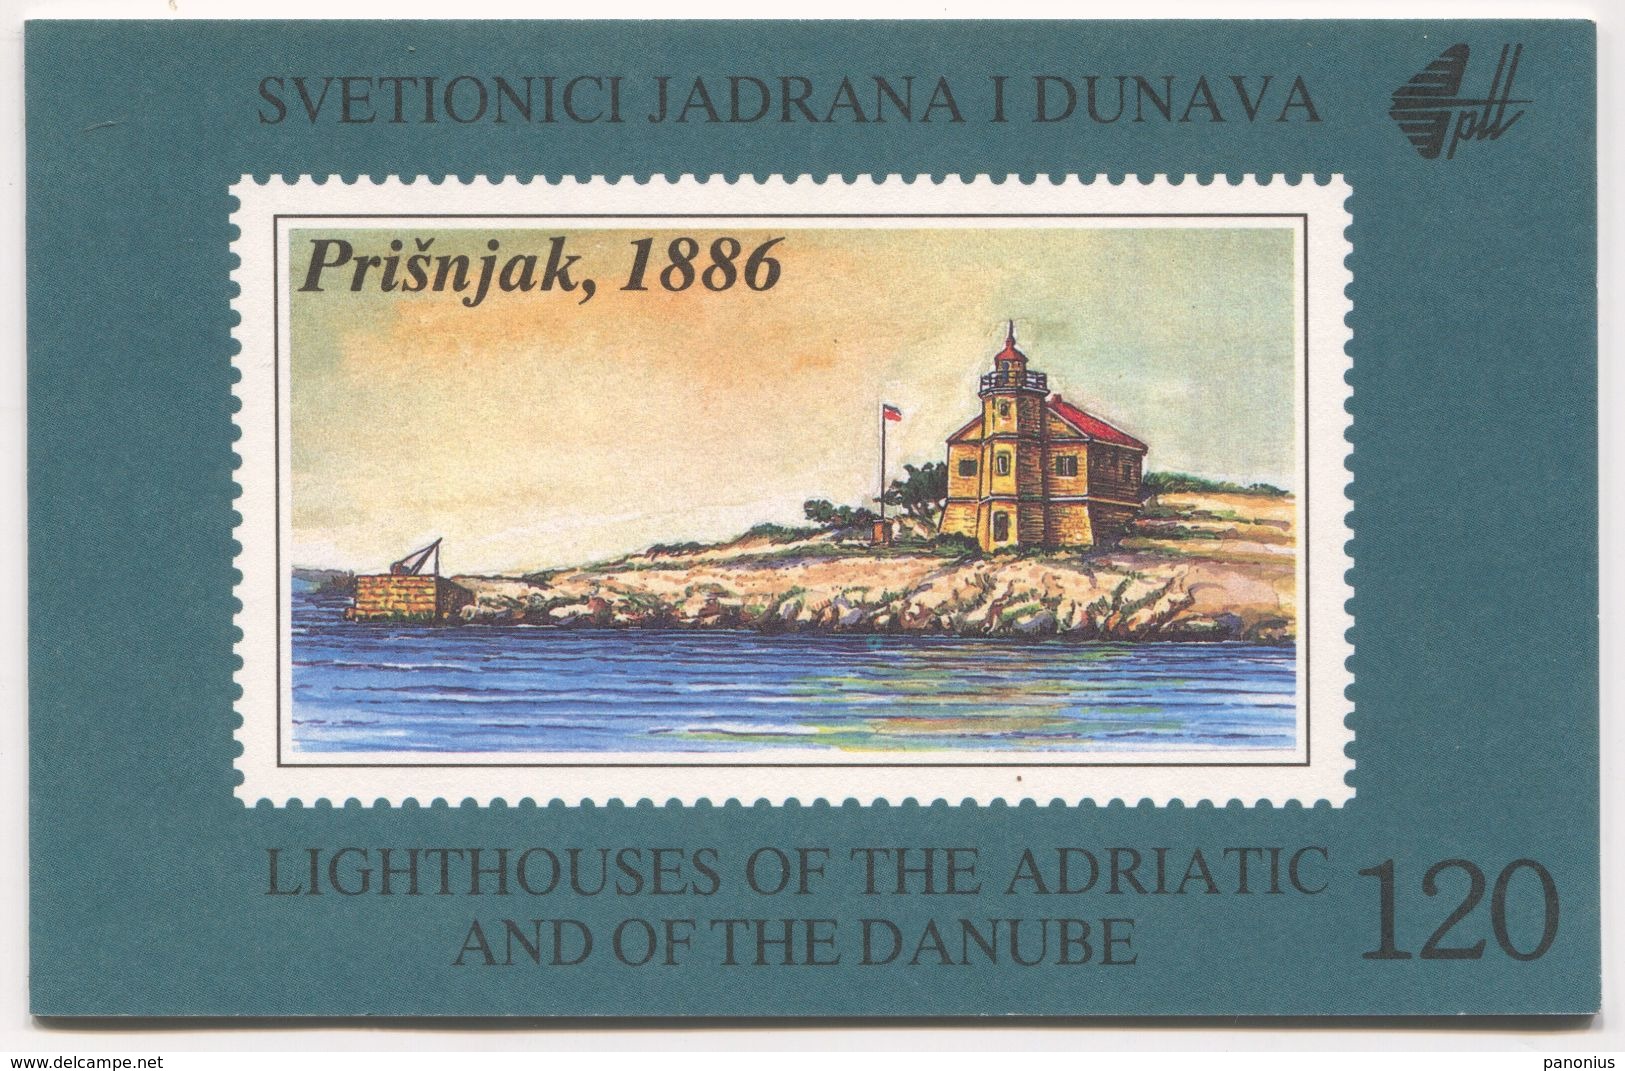 LIGHTHOUSES OF THE ADRIATIC SEA & THE DANUBE, BOOKLET YUGOSLAVIA - Cuadernillos